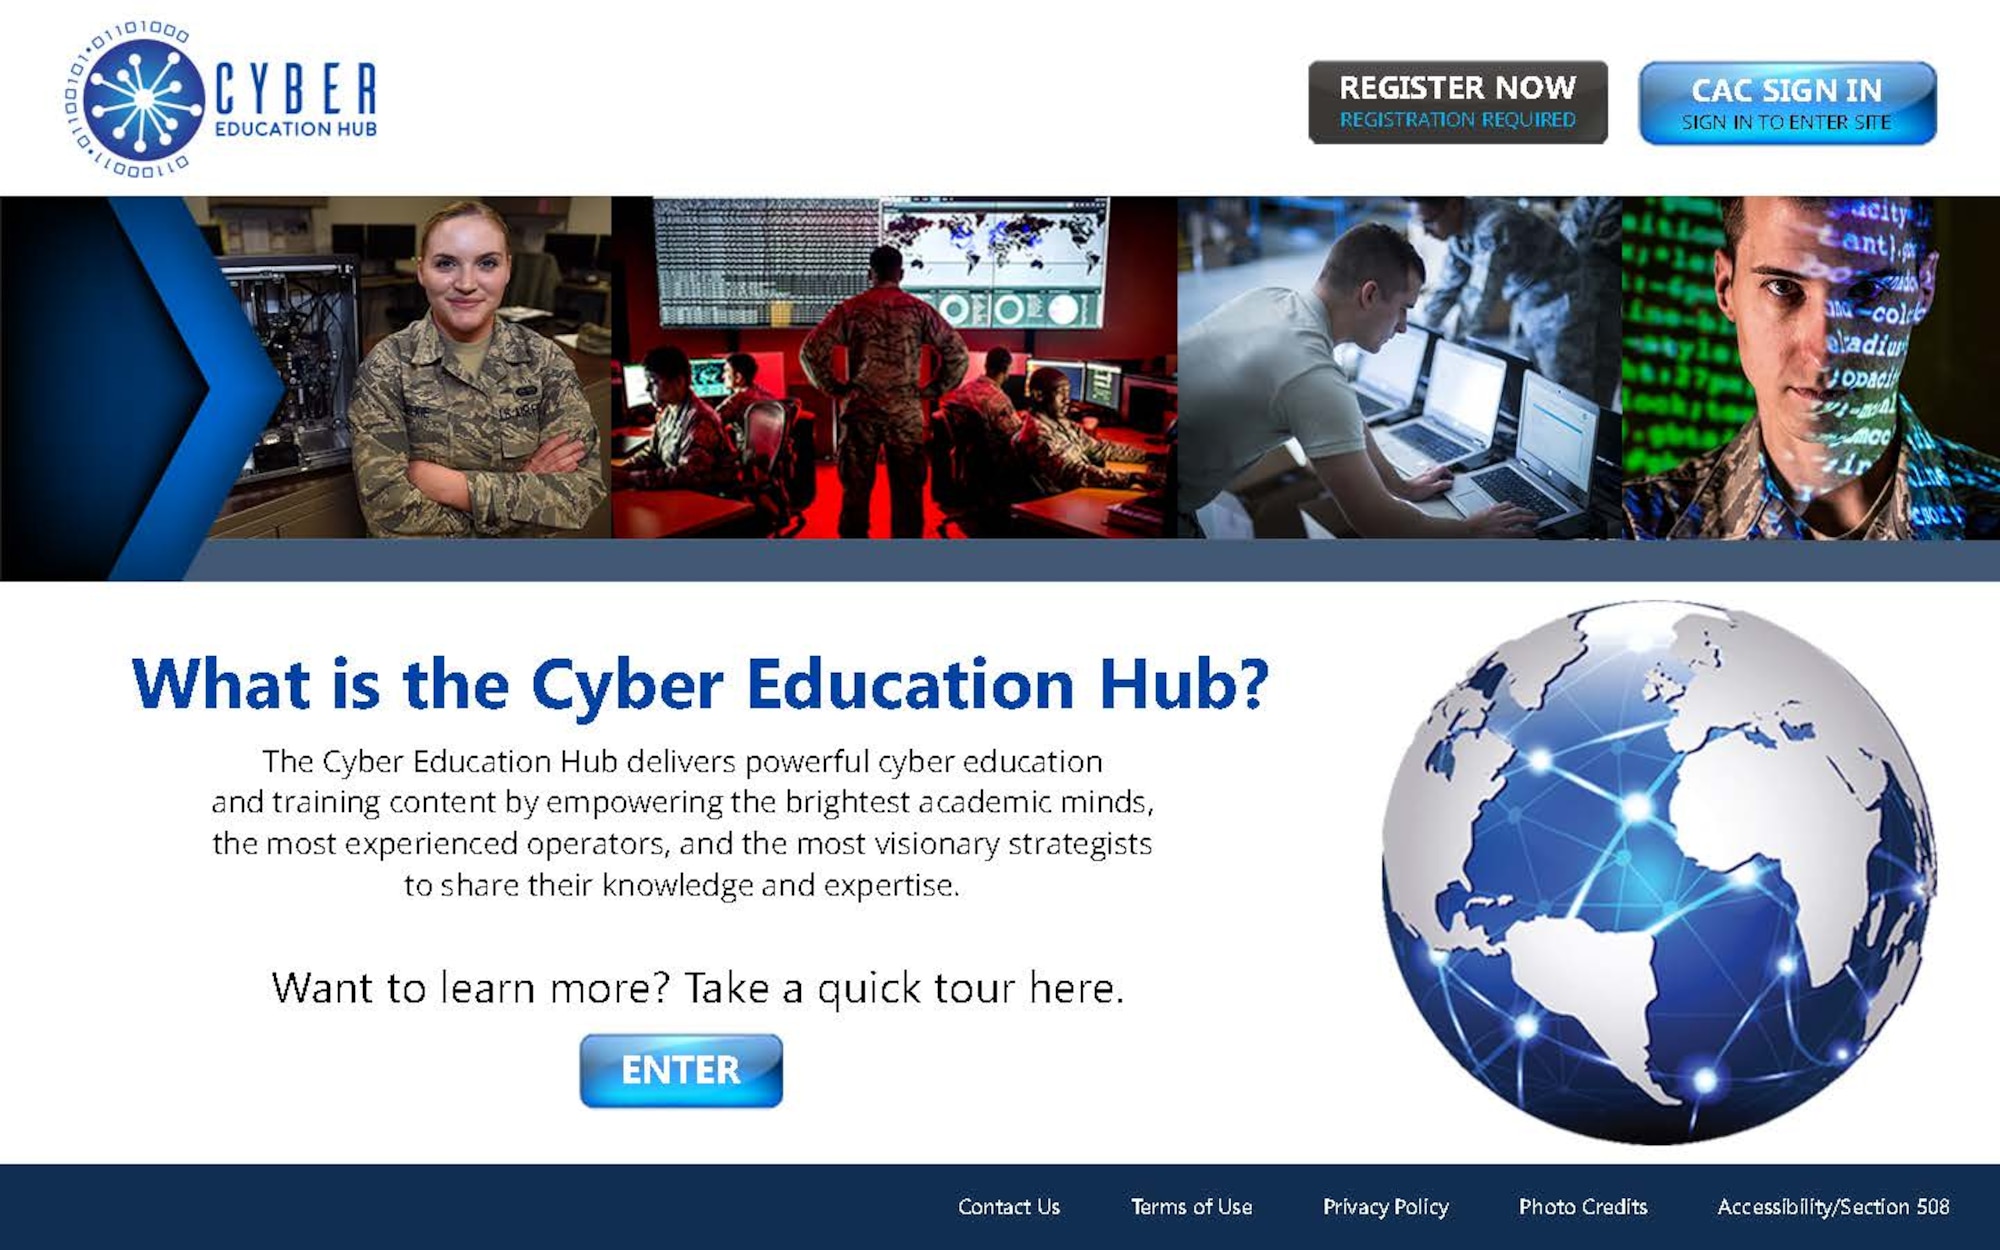 Proposed landing page for the Cyber Education Hub, which is being developed at the Center for Cyberspace Research in the Air Force Institute of Technology at Wright Patterson Air Force Base, Ohio. The online site is a platform for multimedia cyber education content geared to cyber experts and Airmen seeking knowledge of how cyber applies to their career fields. (Photo / AFIT CCR)